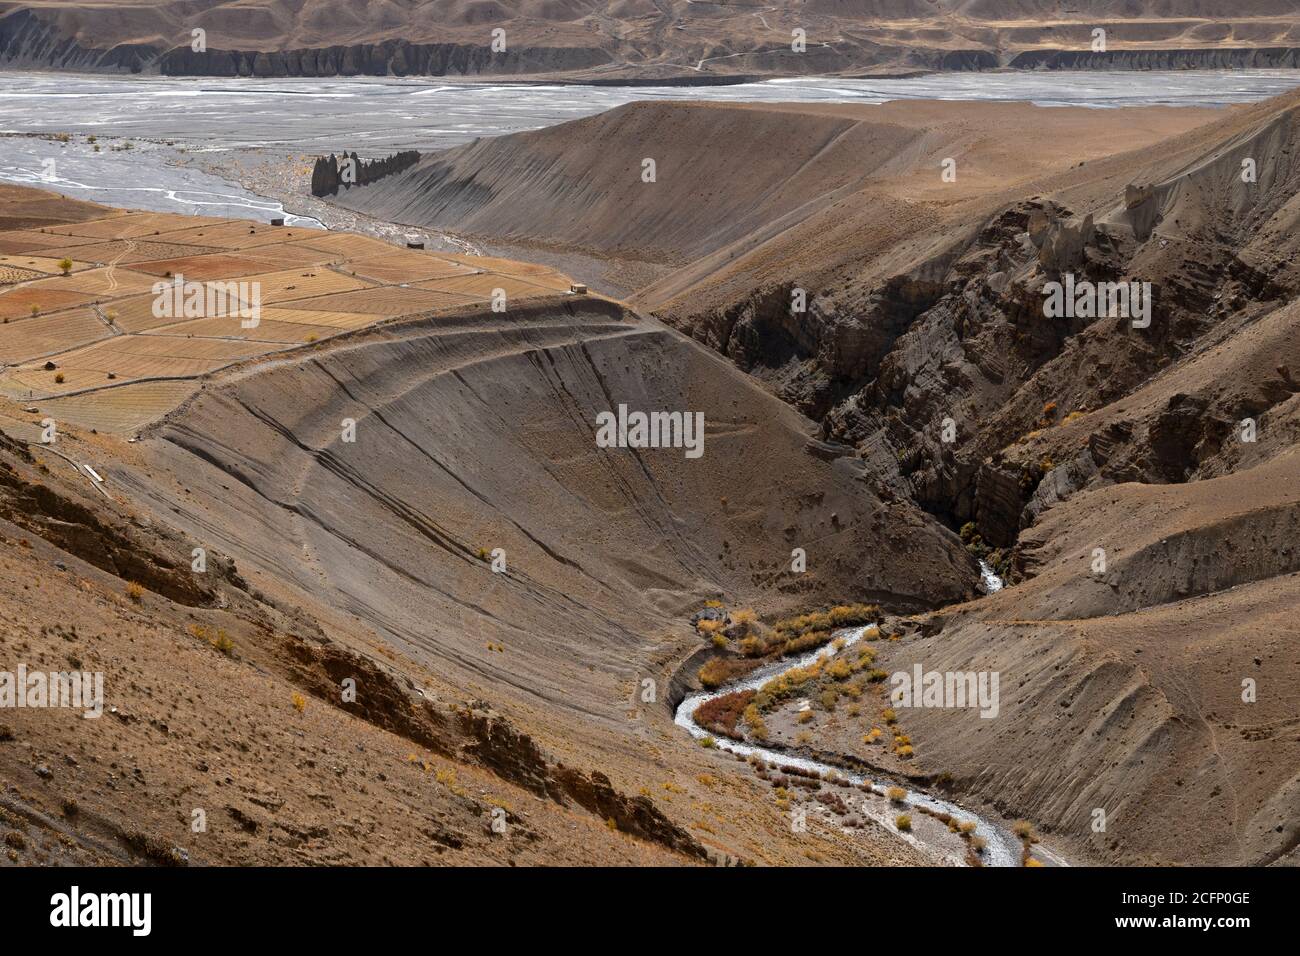 Abstract natural patterns and textures on remote land with small villages, rivers, minimal vegetation, light and shadow Stock Photo